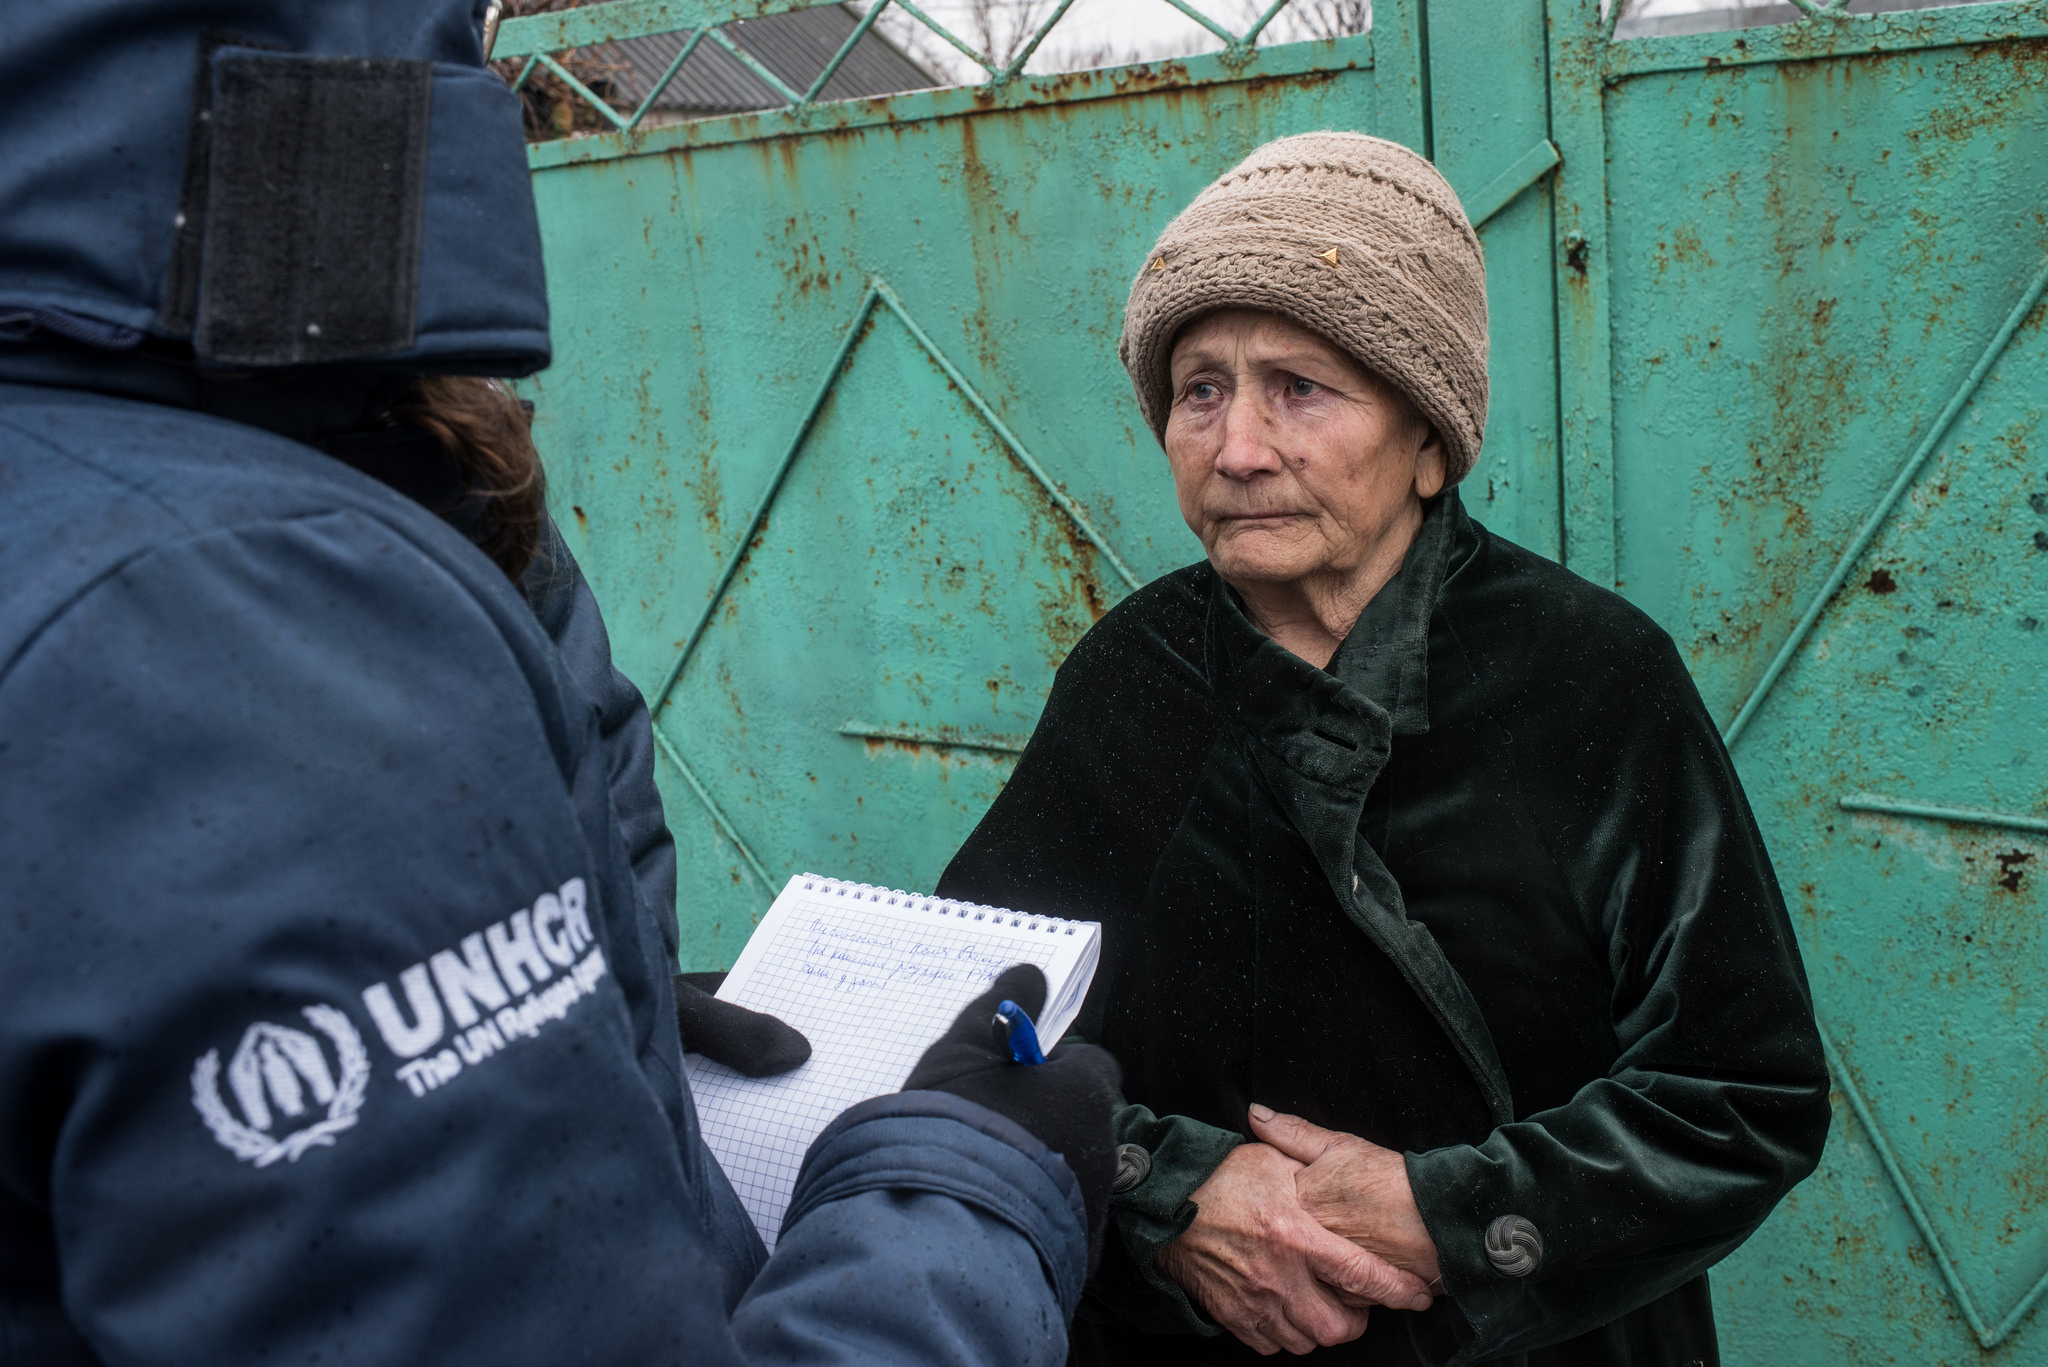 A woman speaks with UNHCR at the frontline village of Luhanske on 12 January 2017.